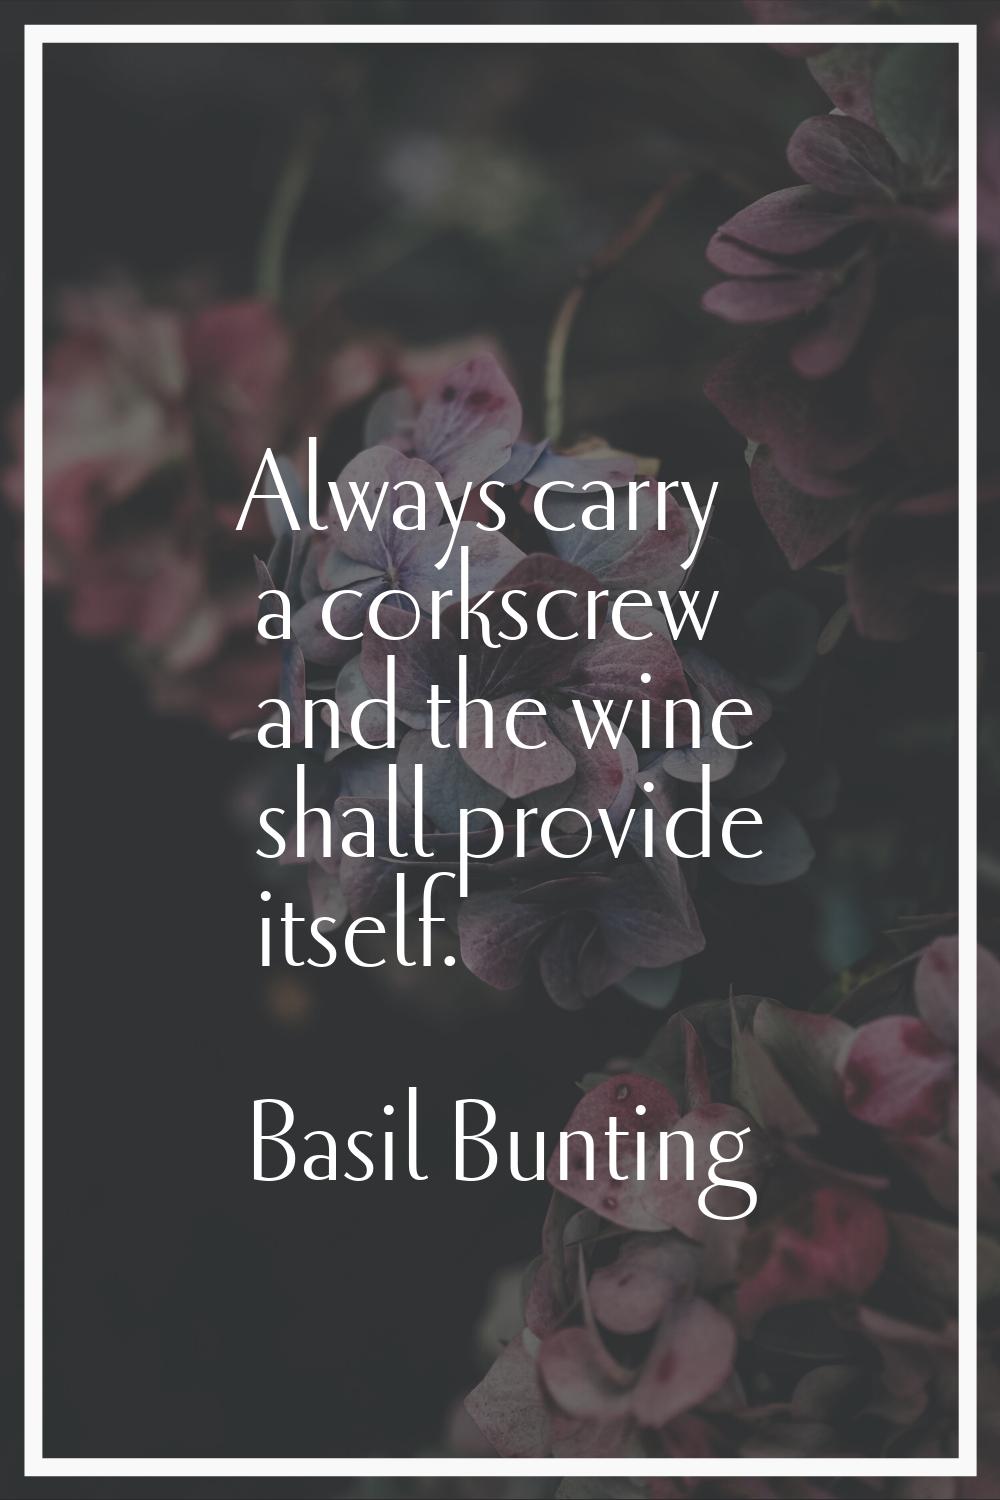 Always carry a corkscrew and the wine shall provide itself.